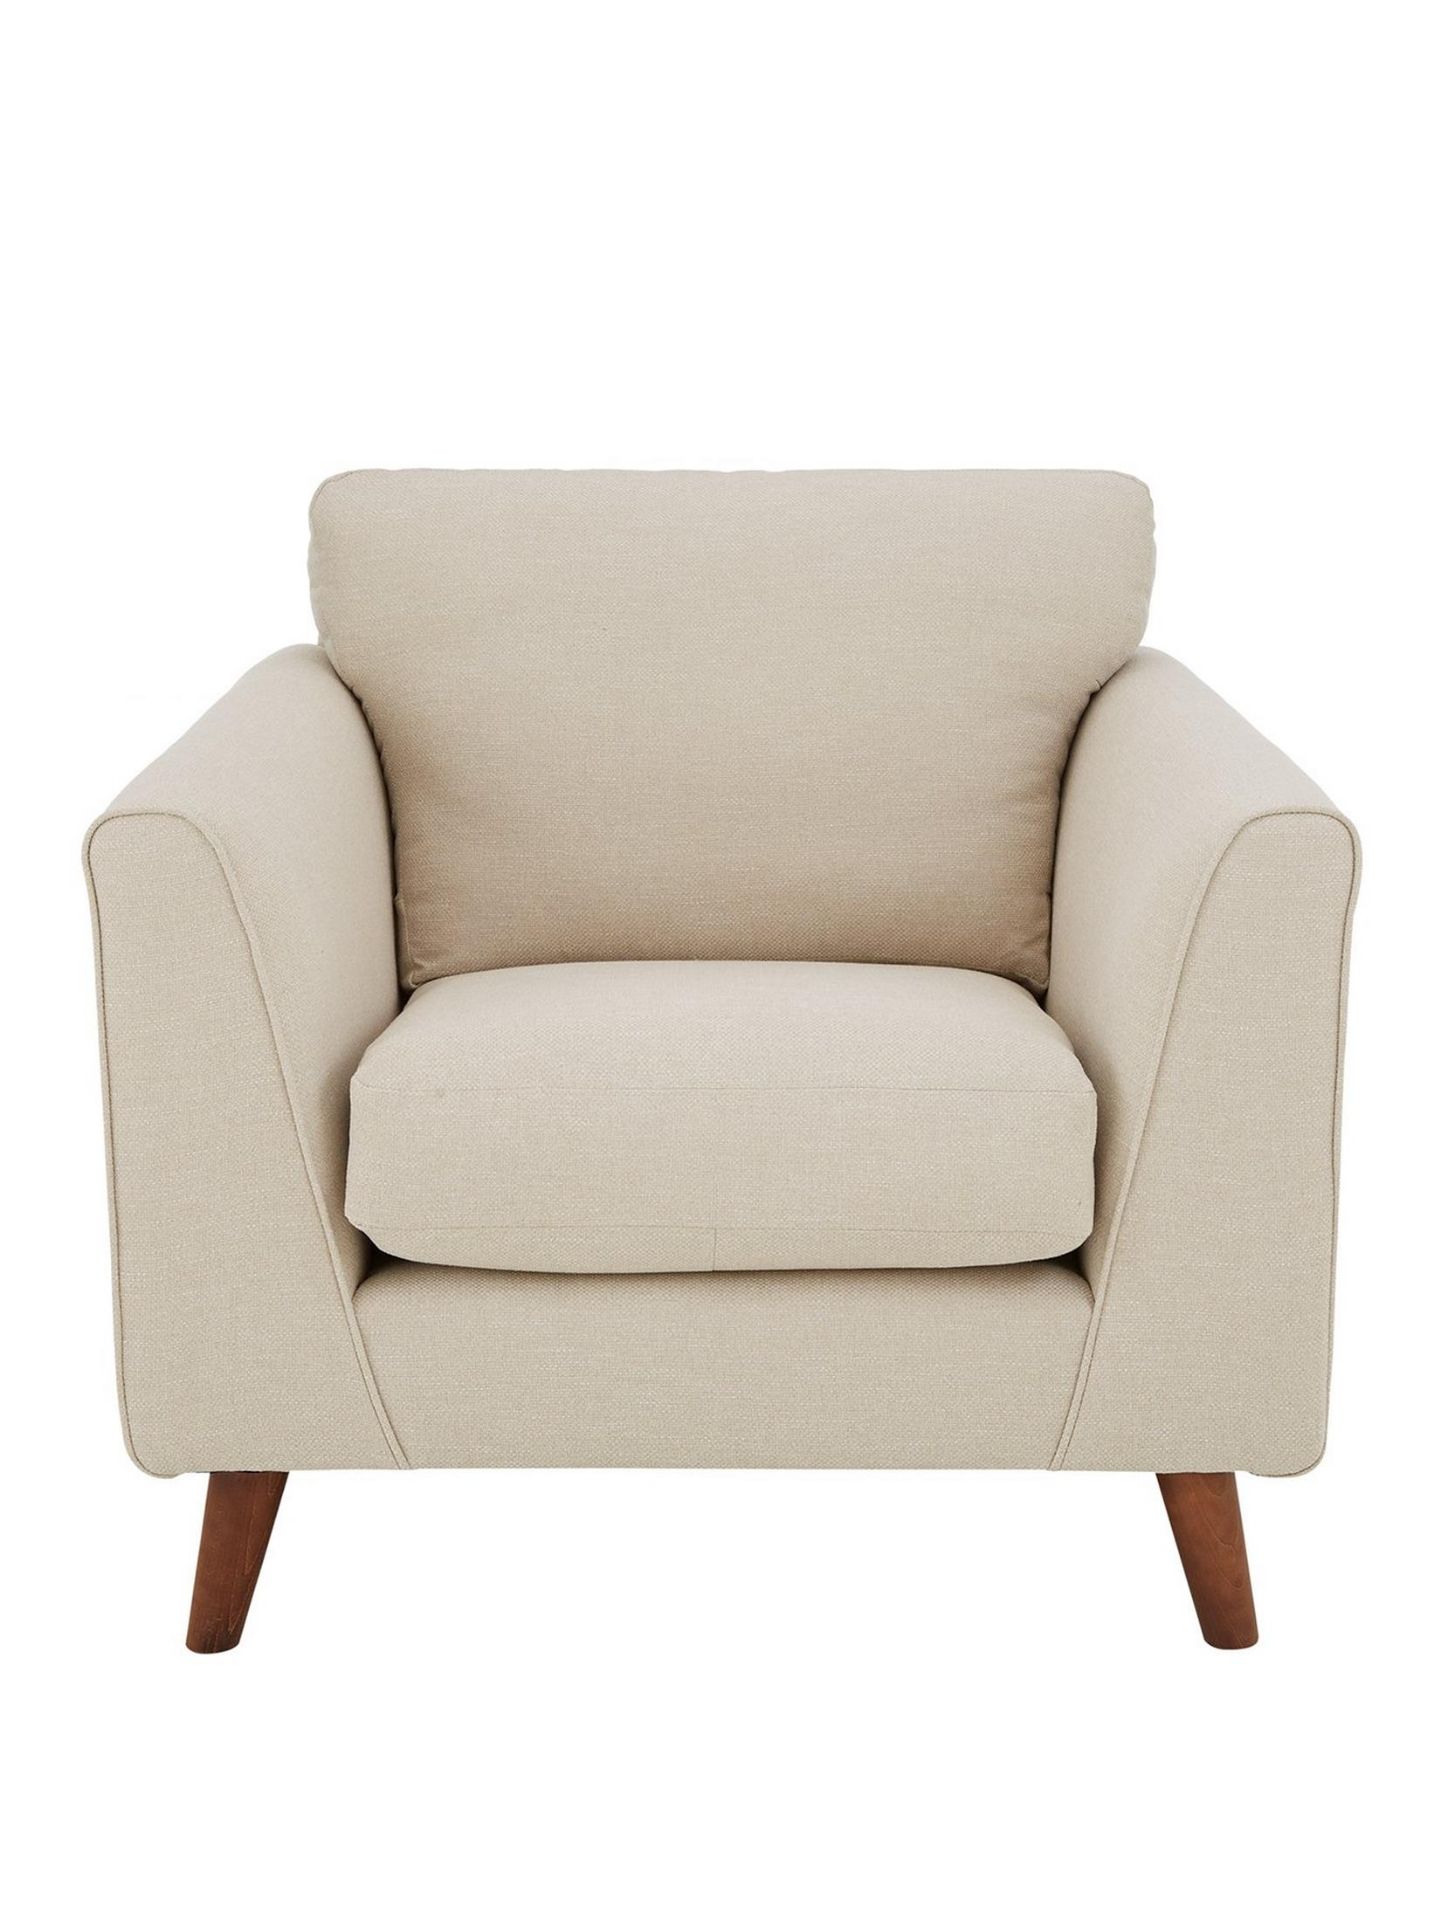 Otis Armchair. RPP £579.00. Dimensions: Height 90.5, Width 96, Depth 90 cm Assembly: Part - Image 2 of 3